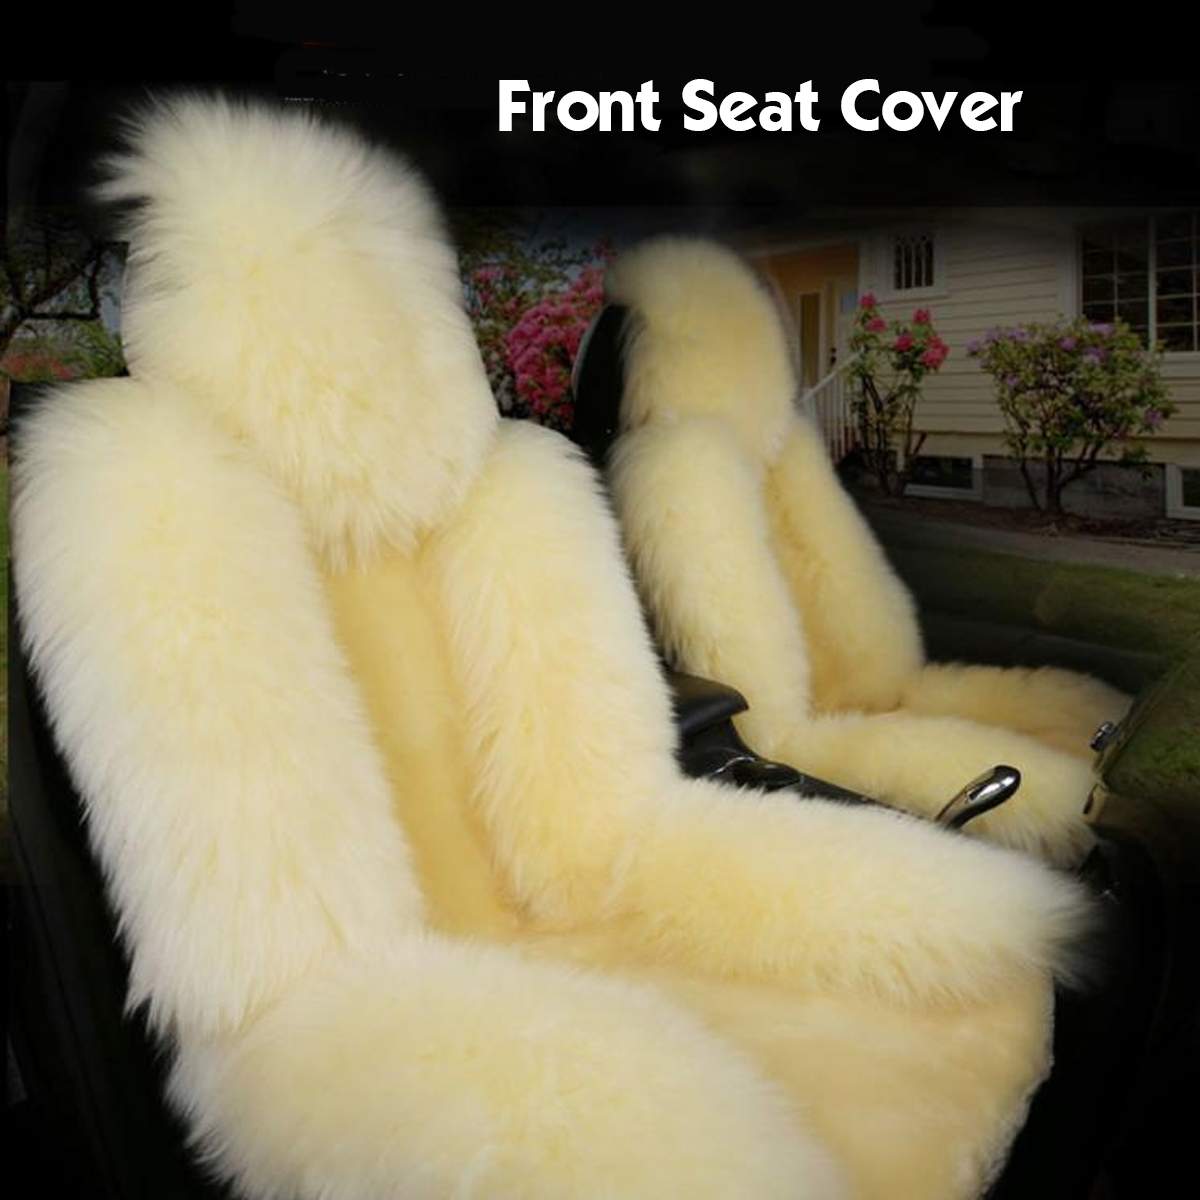 Auto Seat Cover Lange Wollen Front Seat Cover Universele Auto Zitkussen Winter Warm Furry Fluffy Auto Voorste Rij seat Hoes